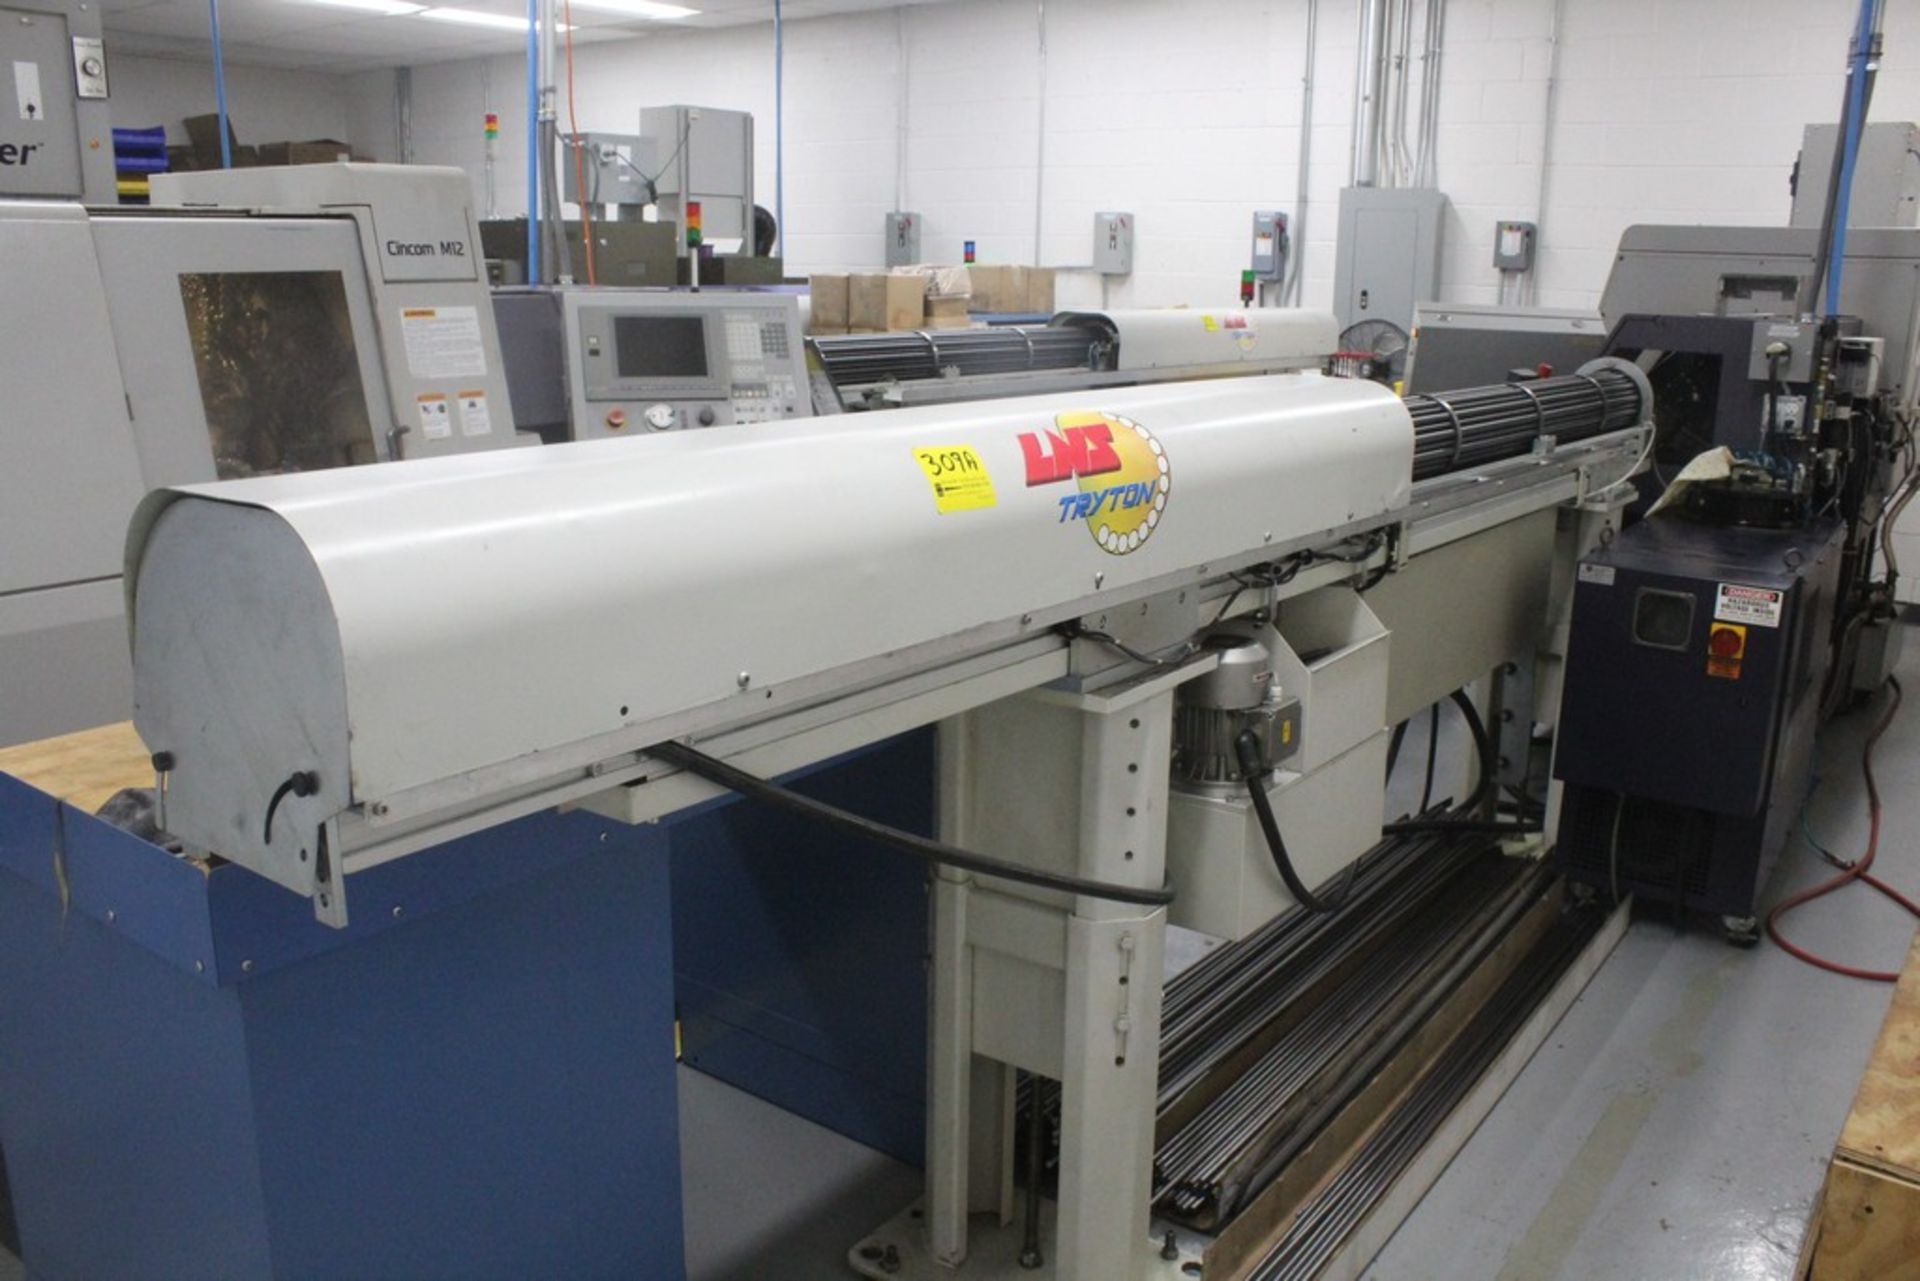 LNS TRYTON MODEL 112 BAR FEED WITH DIGITAL CONTROL, S/N 170002 (CONSIGNED BY SWISS MACHINING